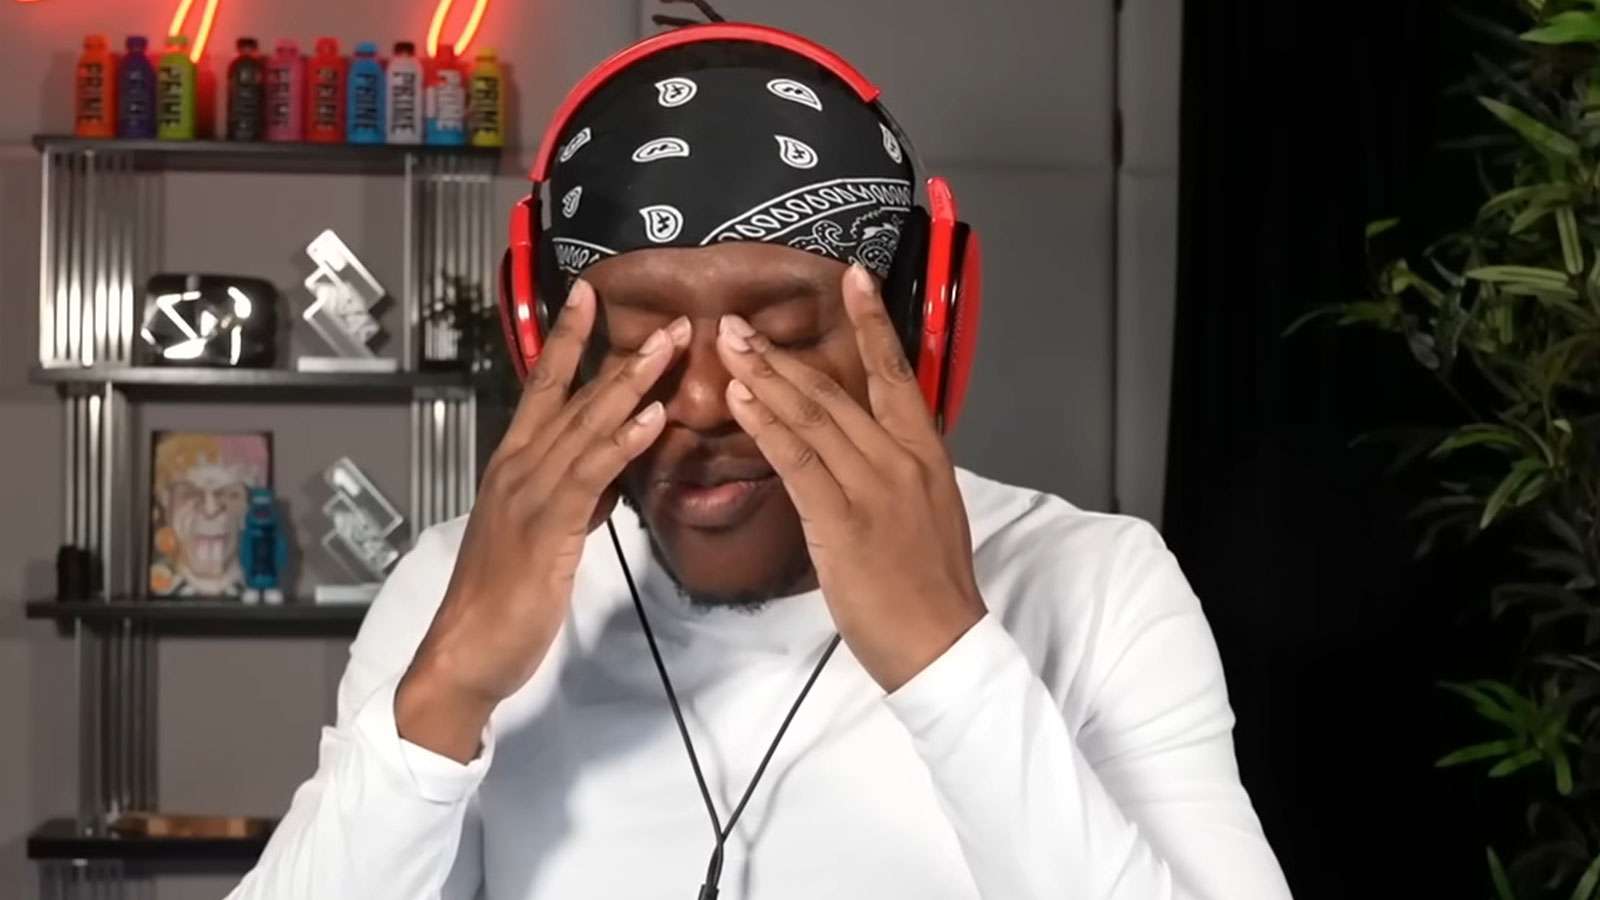 KSI holding his head in his hands wearing white long sleeve